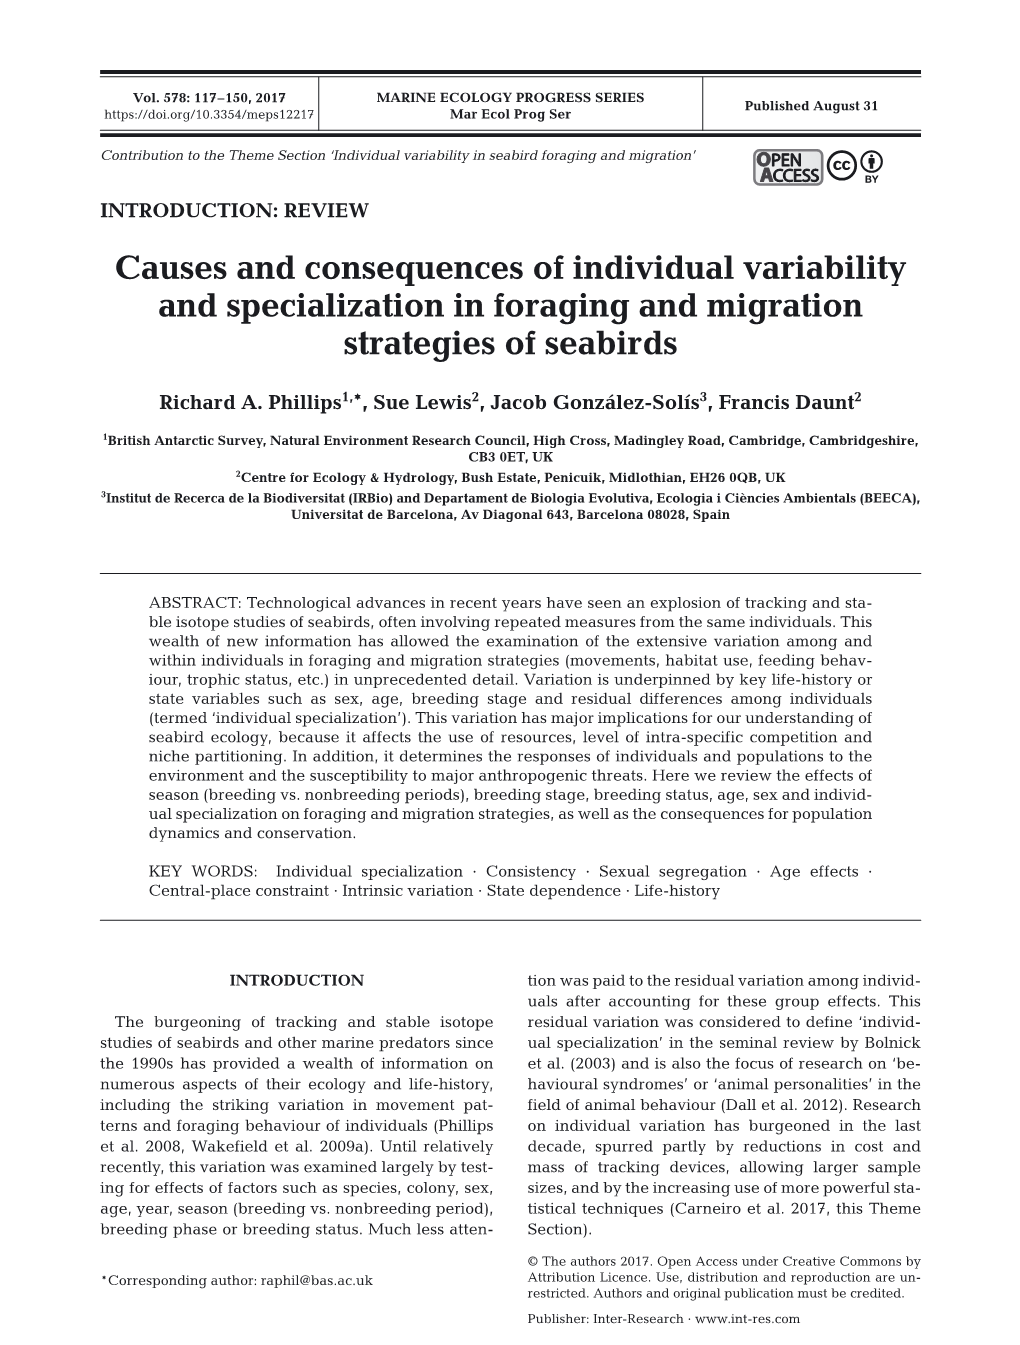 Causes and Consequences of Individual Variability and Specialization in Foraging and Migration Strategies of Seabirds